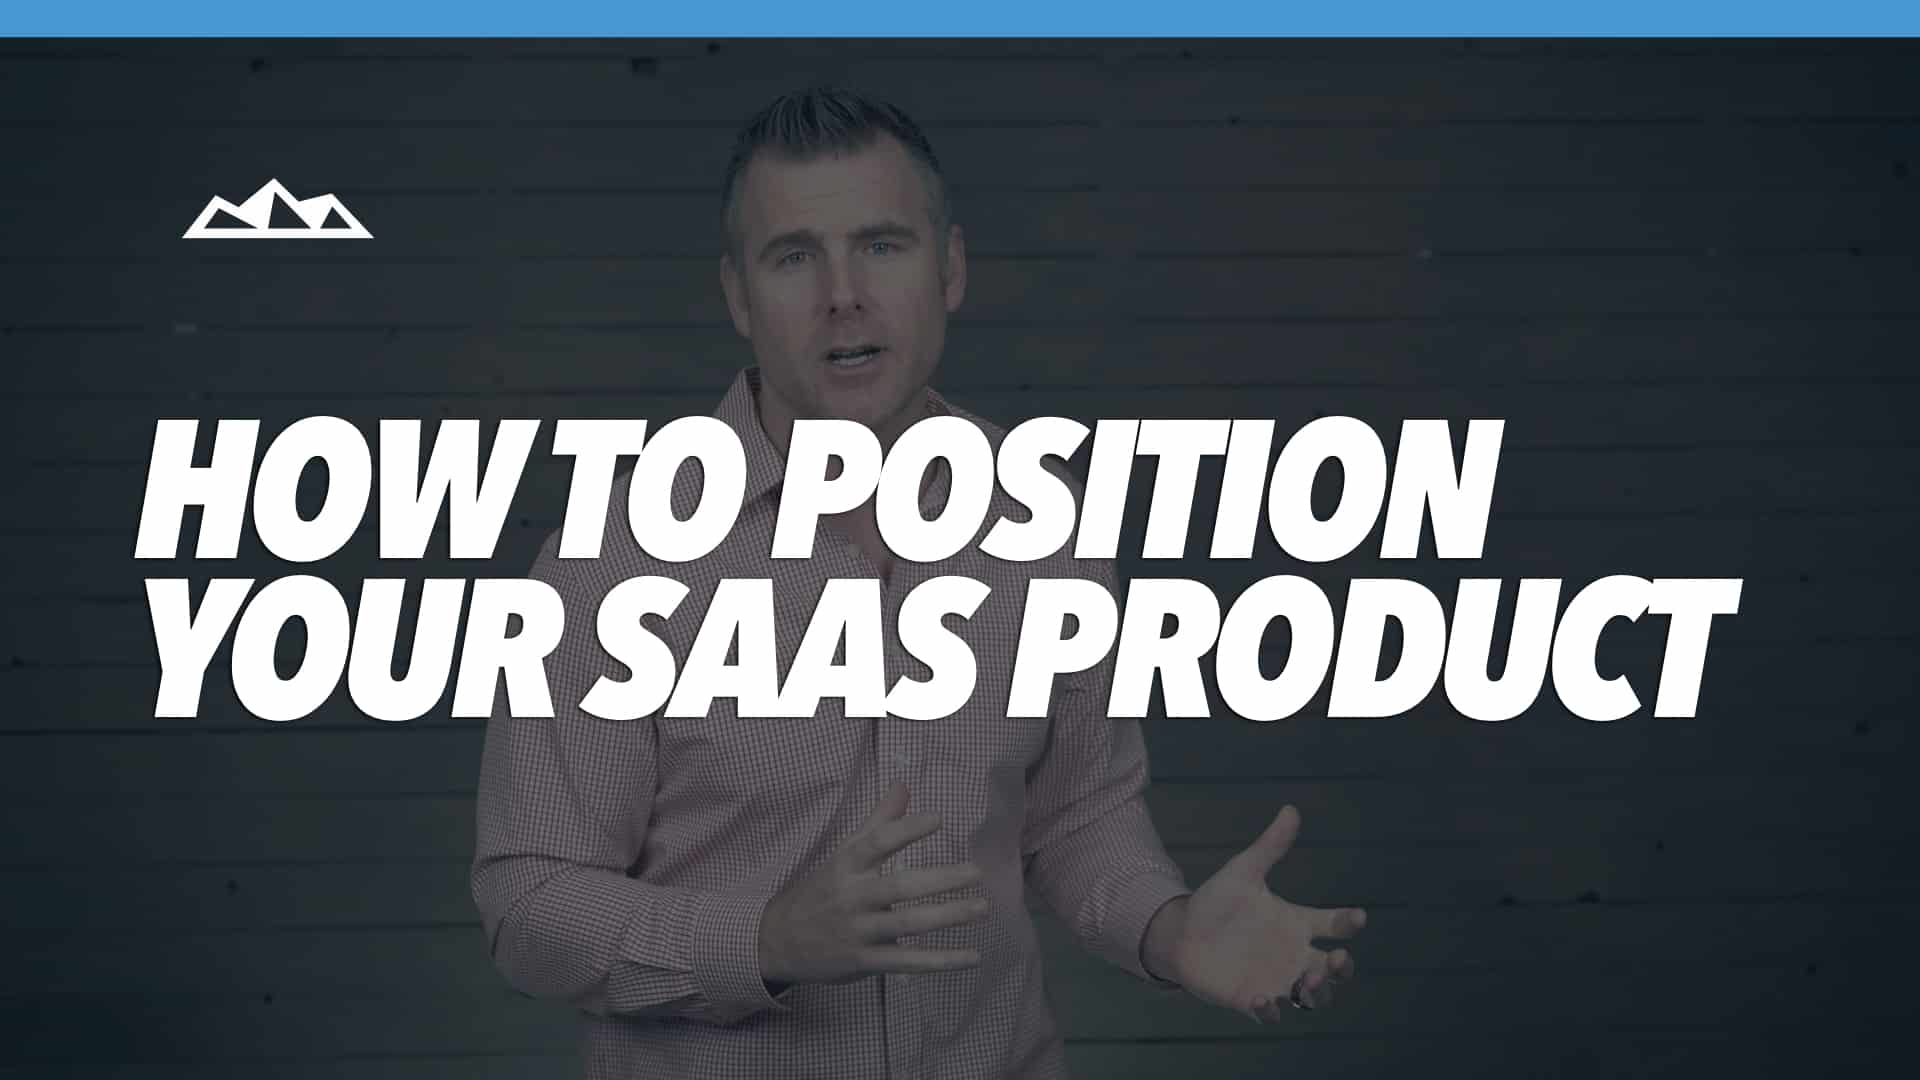 The 6 Components to Positioning Your SaaS Product So It Sells Itself